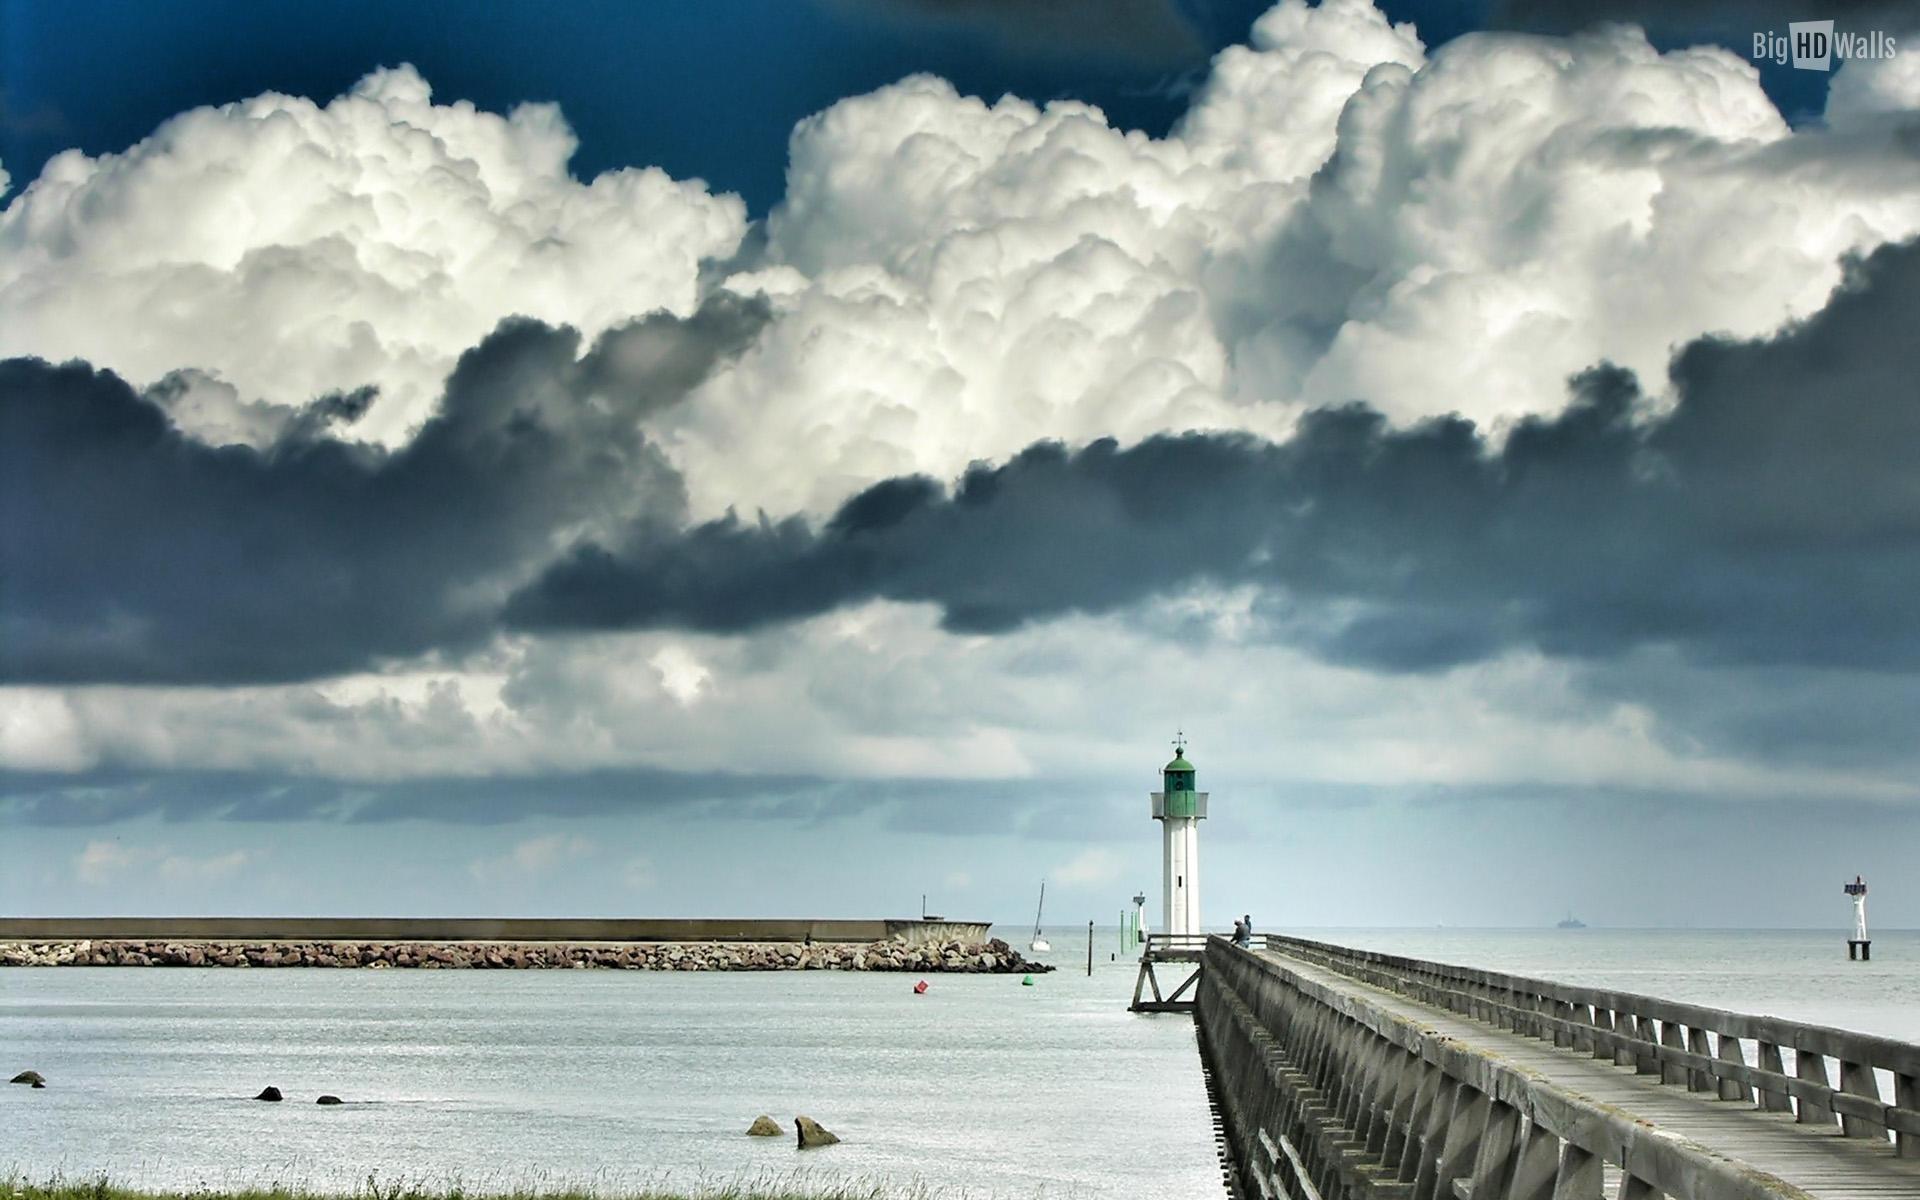 The lighthouse and the storm clouds HD Wallpaper